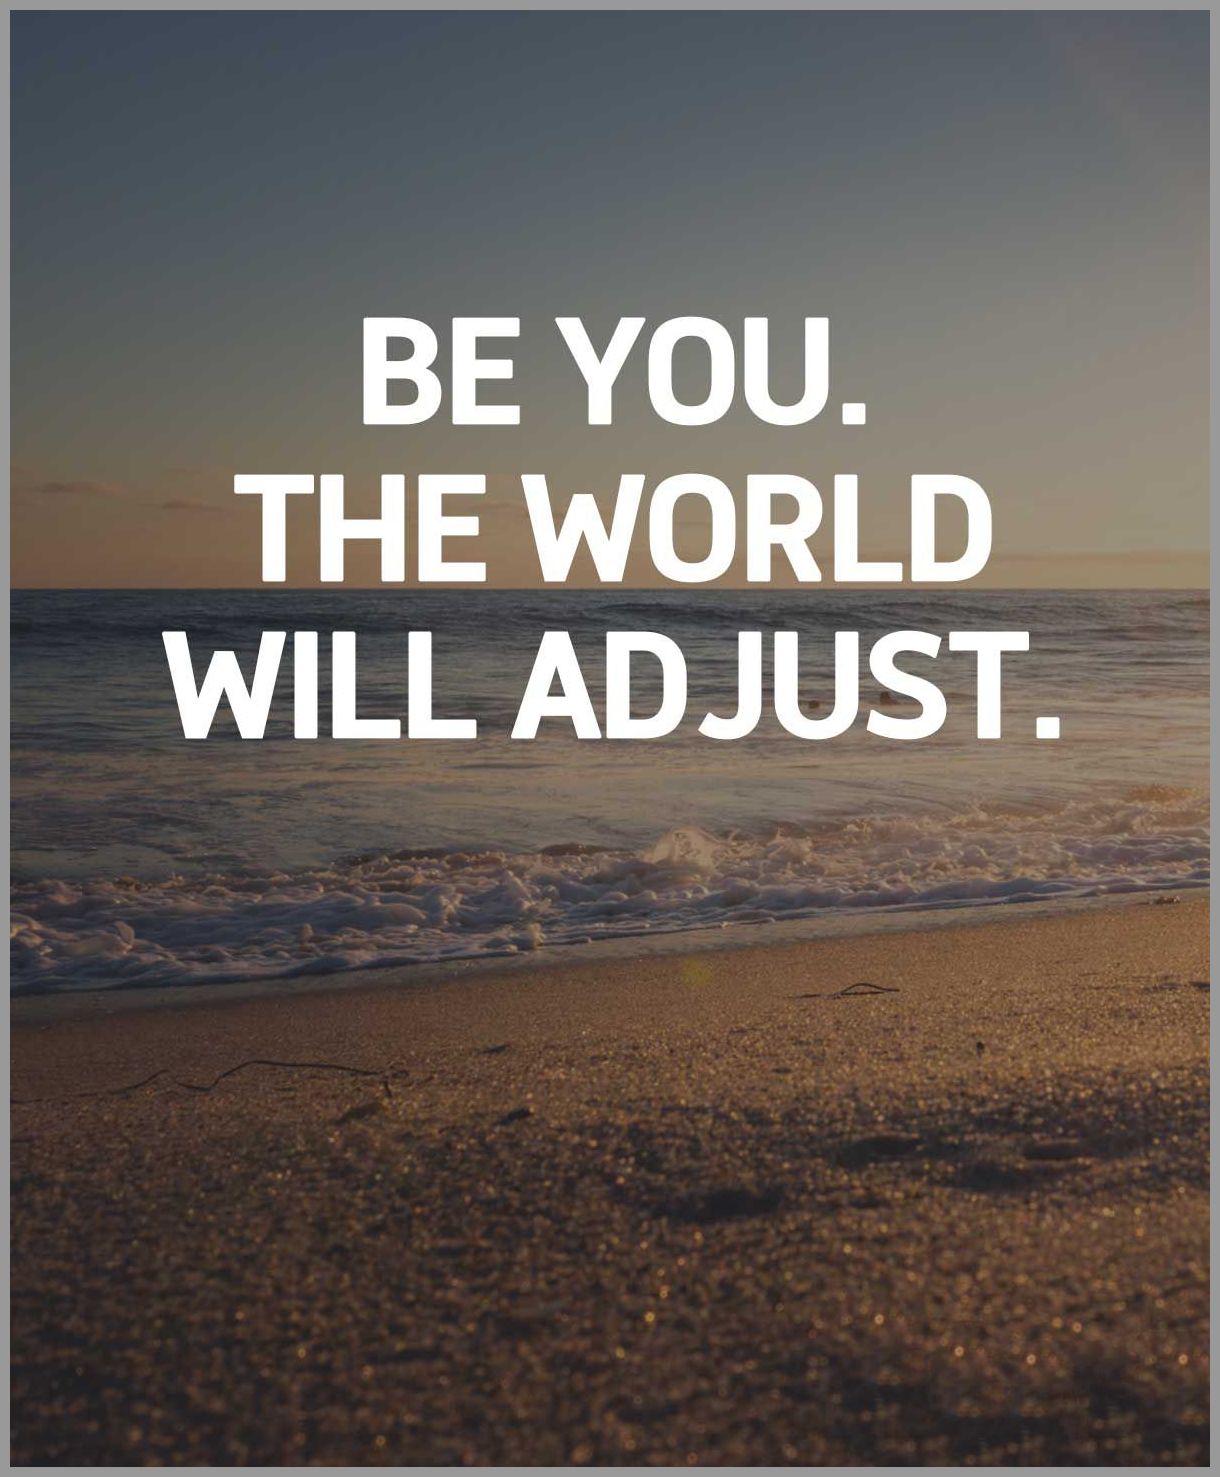 Be you the world will adjust - Be you the world will adjust